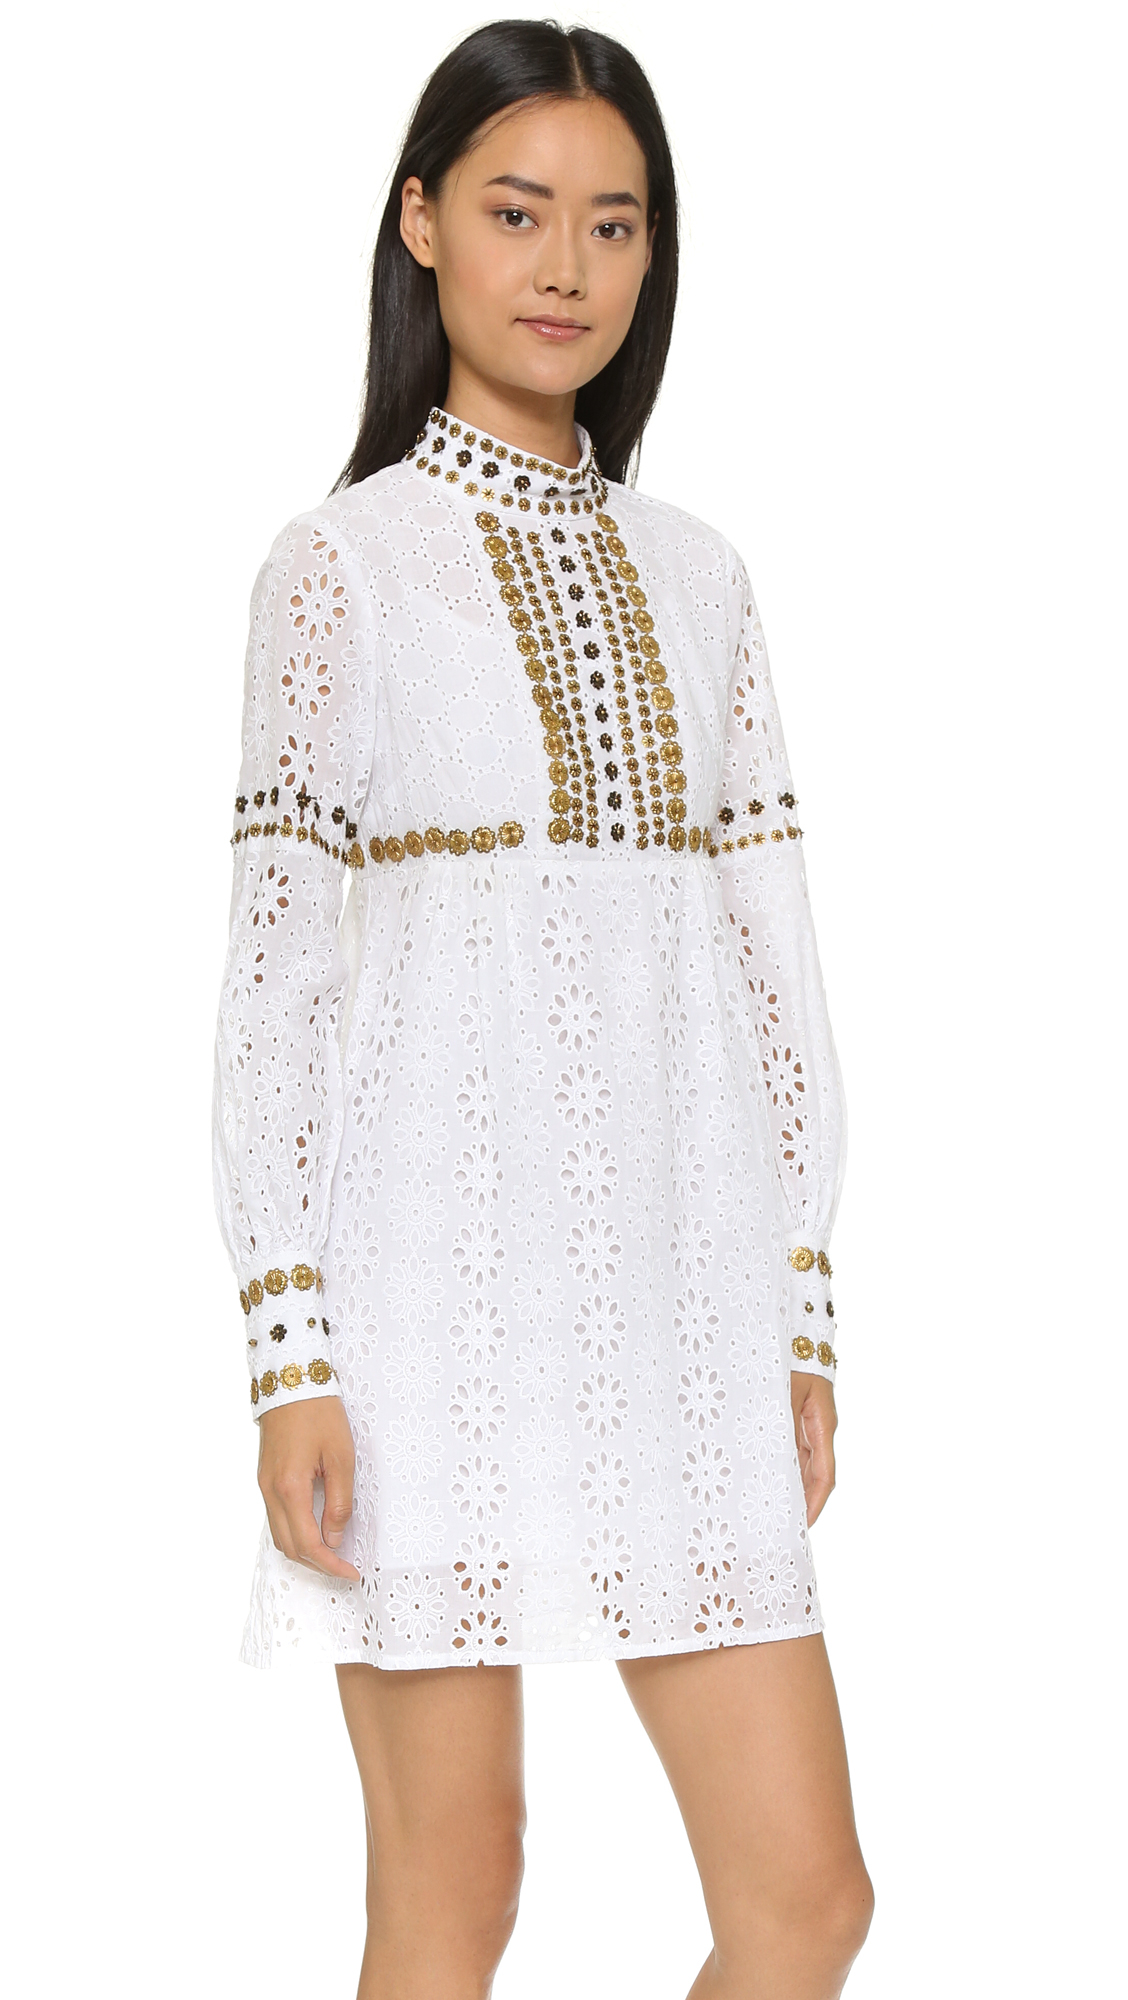 Lyst - Anna Sui Medallion Embroidery Dress - Ivory Multi in White